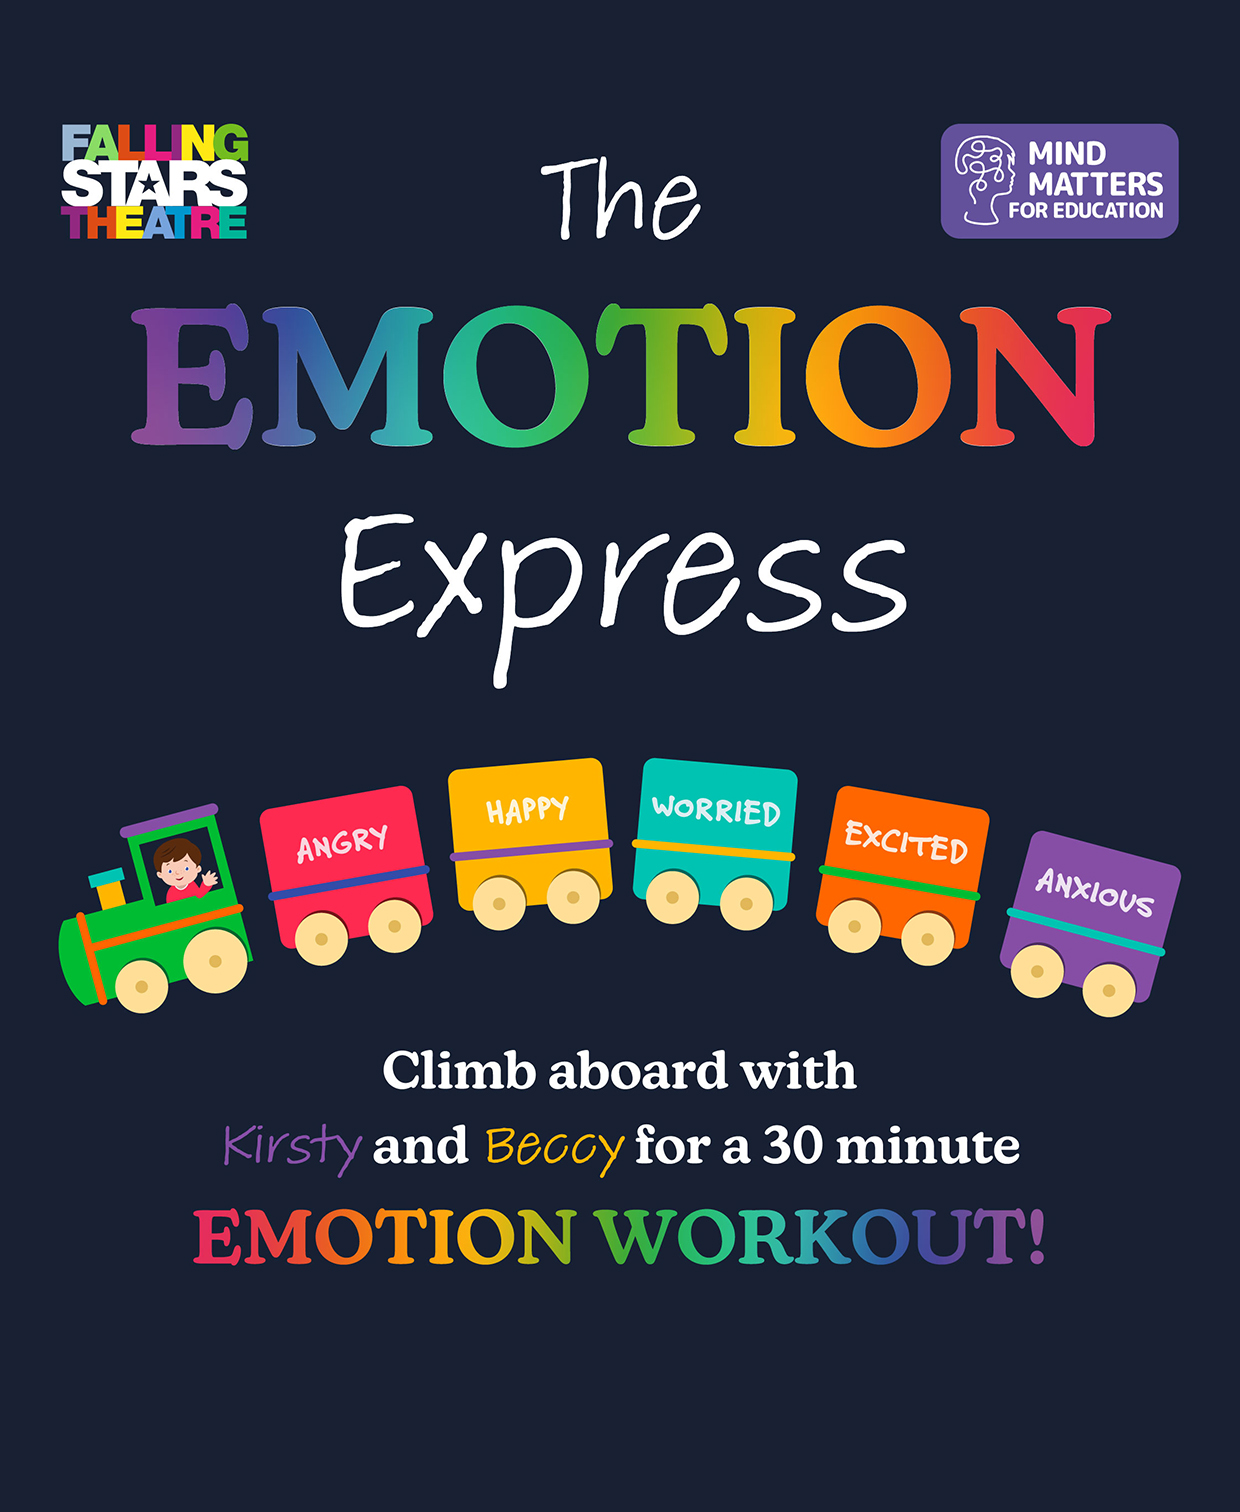 The Emotion Express - Falling Stars Theatre Workshop